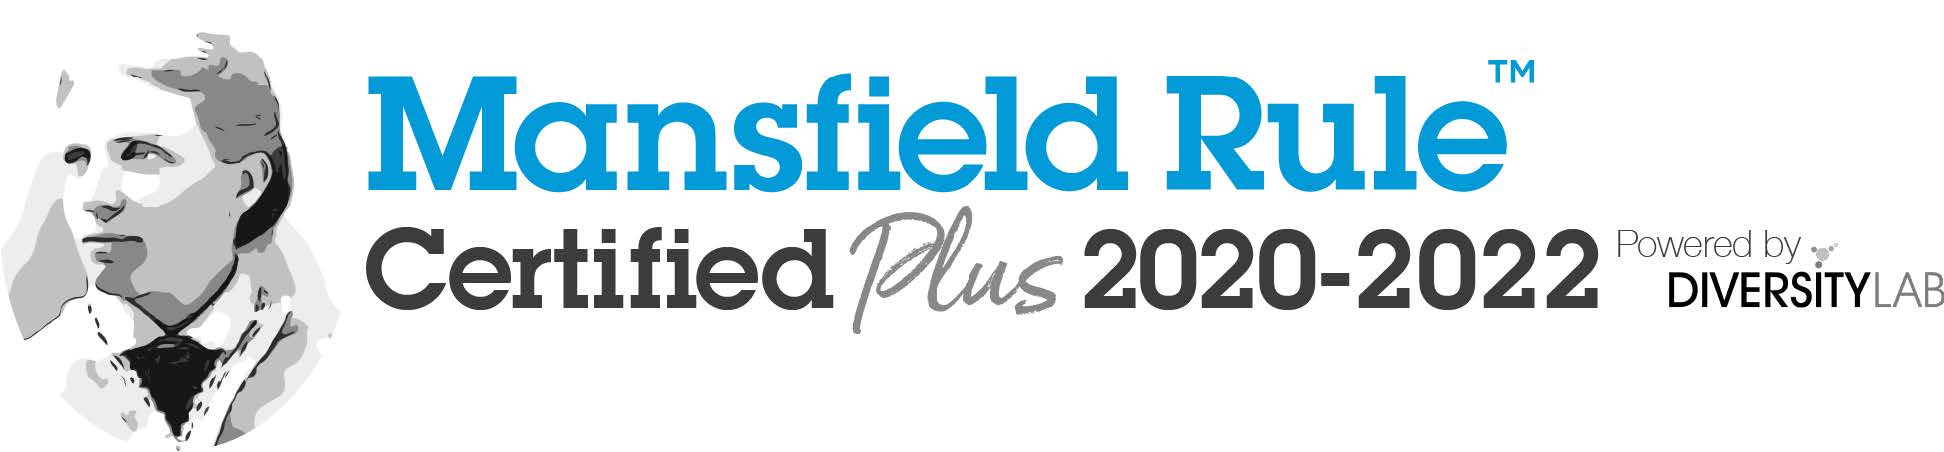 Image of Arabella Mansfield with text "Mansfield Certified Plus, 2020-2022"